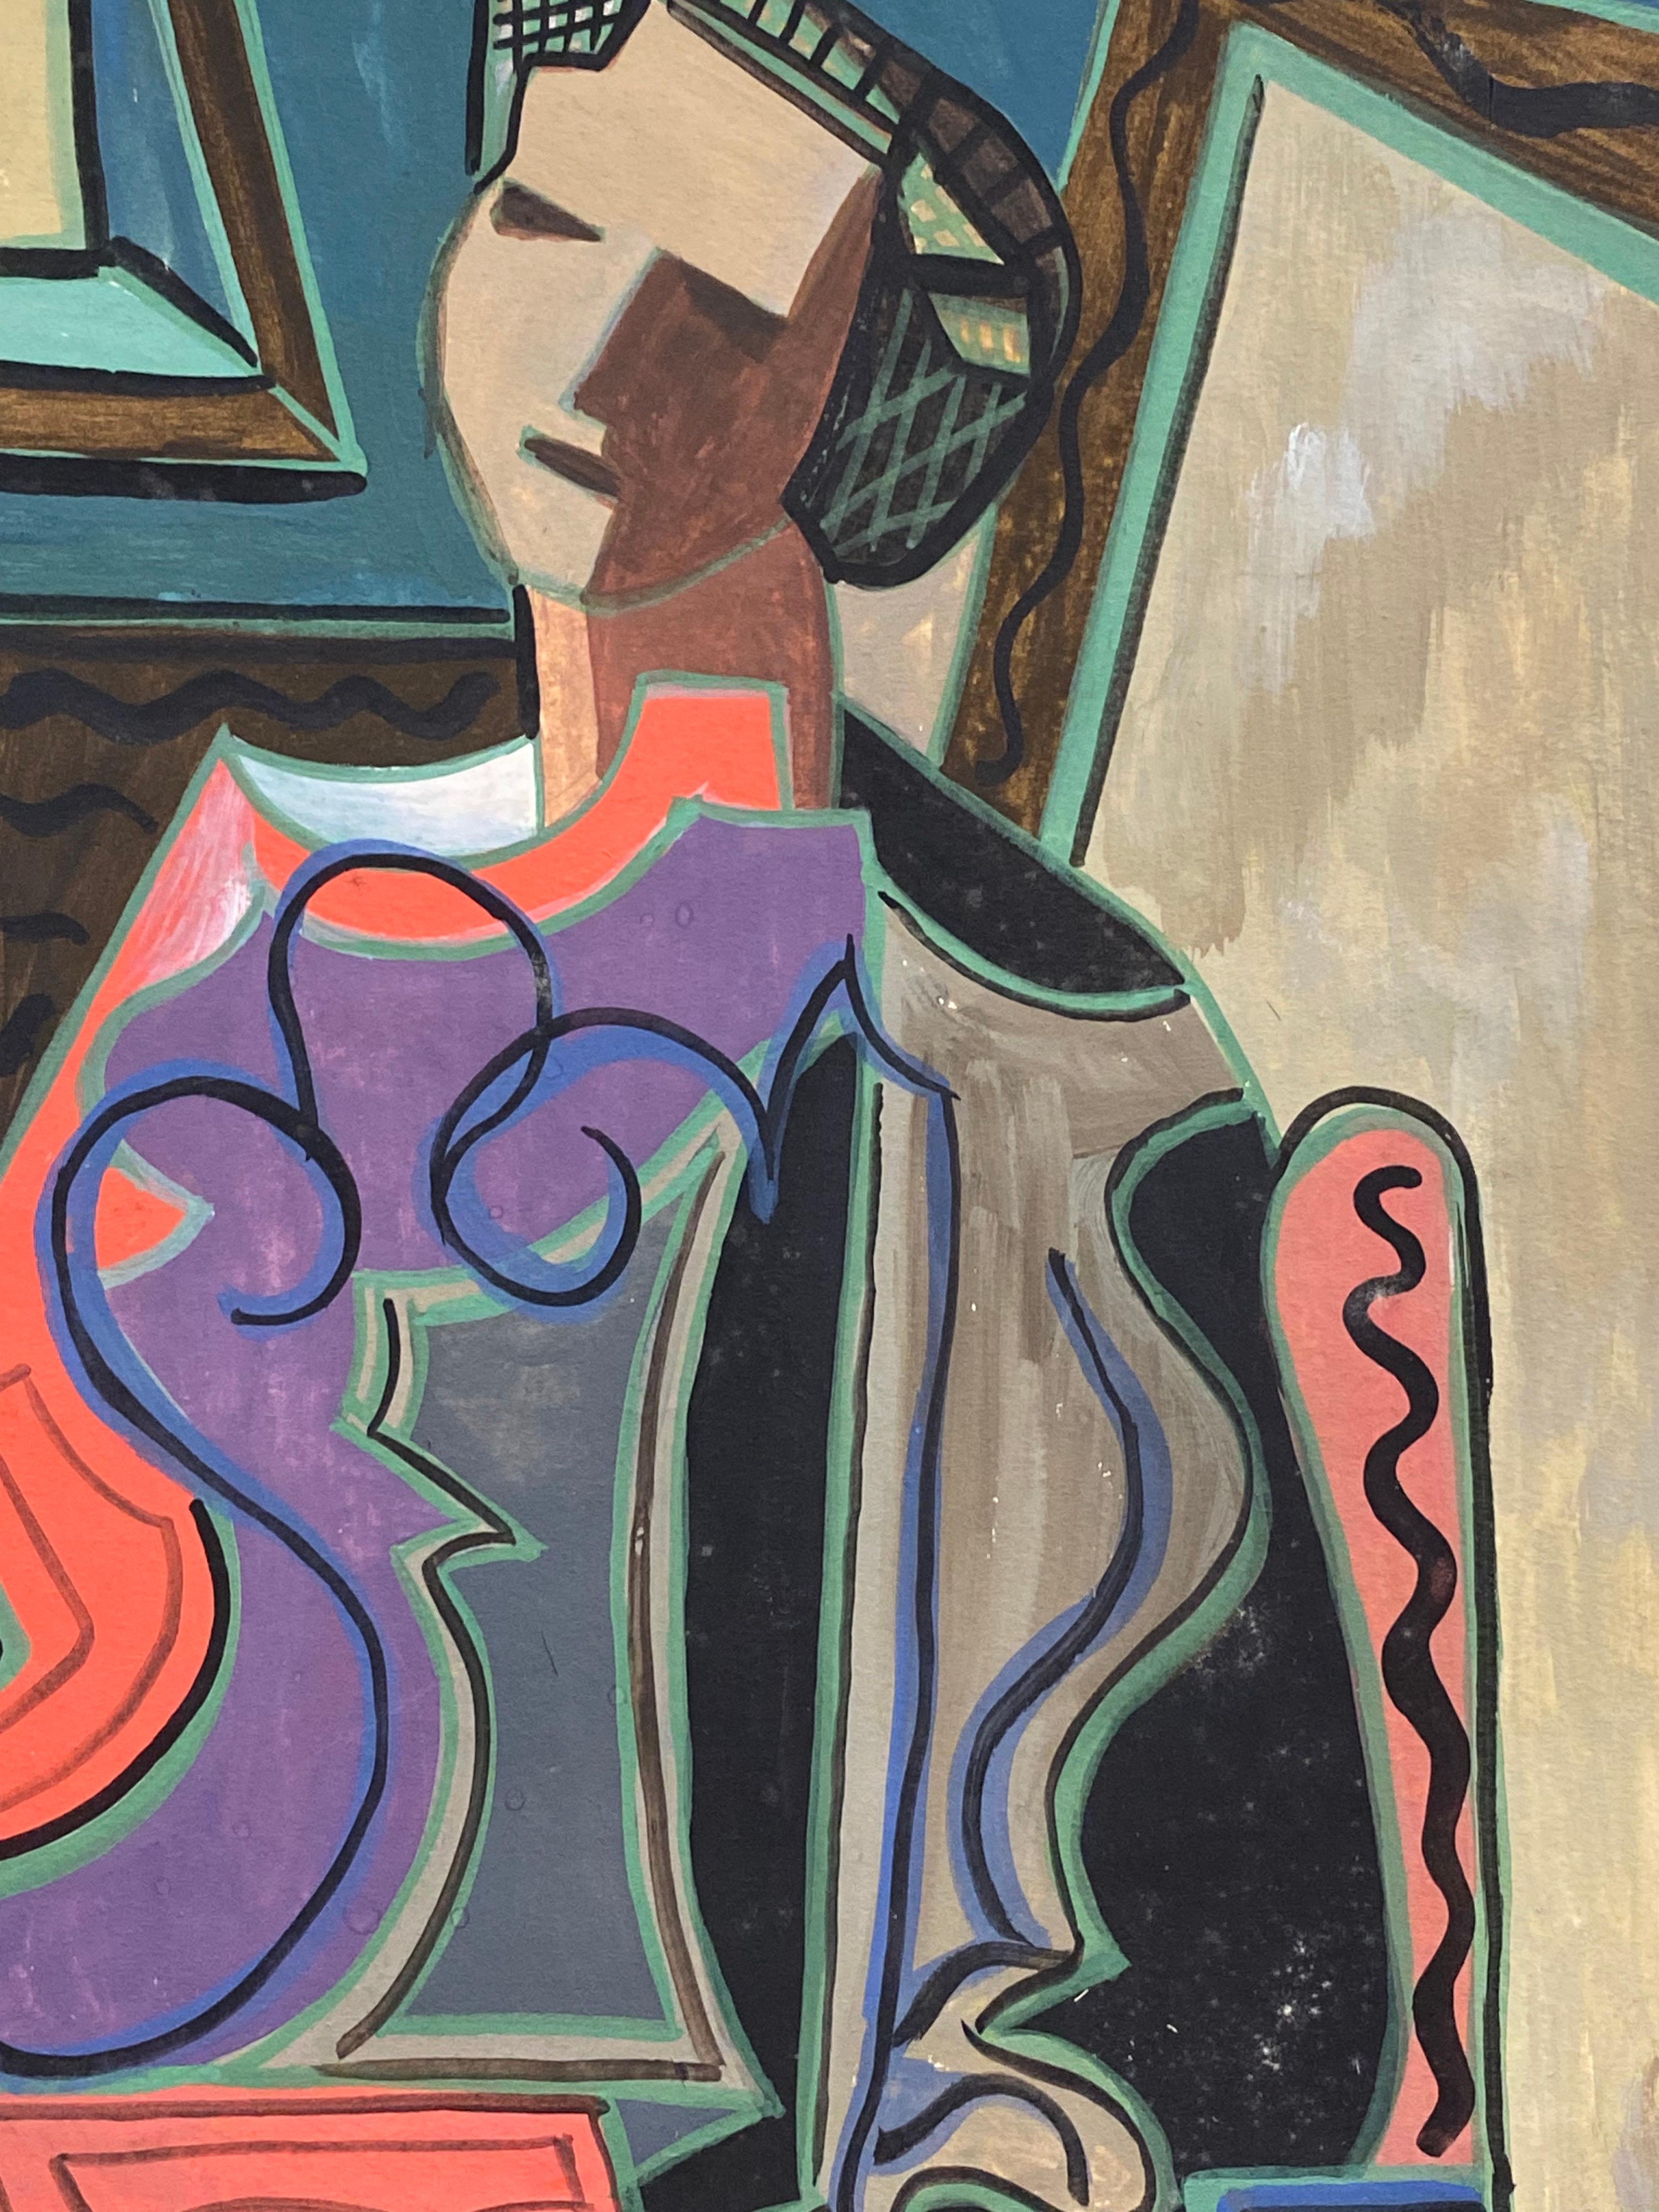 Cubist Portrait
by Bernard Labbe (French mid 20th century)
original watercolour/ gouache painting on paper board, unframed
size: 12.5 x 9.5 inches
condition: very good and ready to be enjoyed. 

provenance: the artists atelier/ studio, France